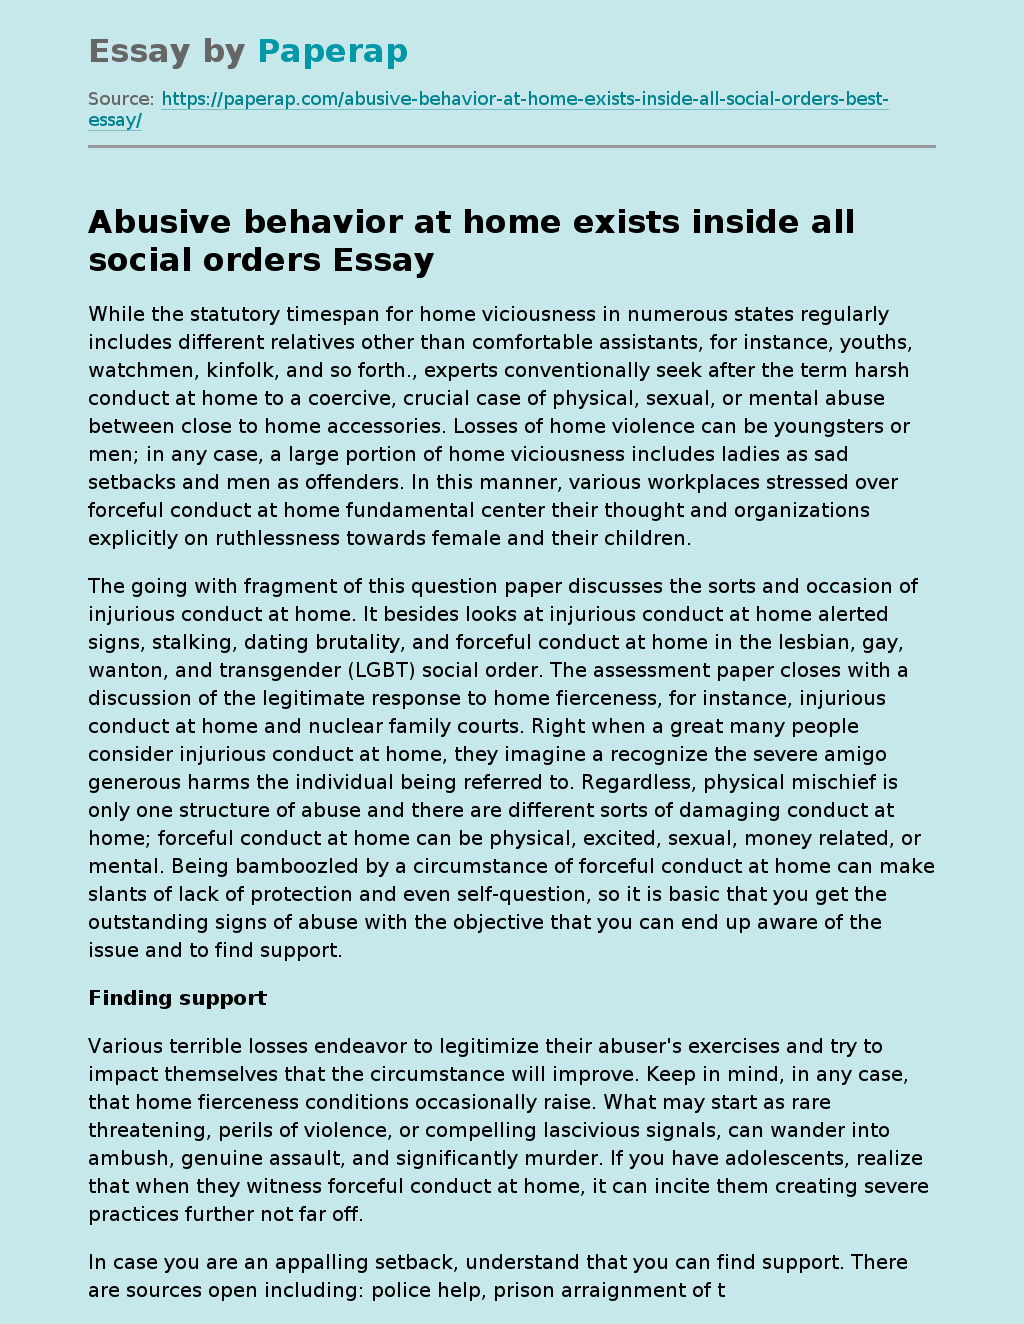 Abusive behavior at home exists inside all social orders